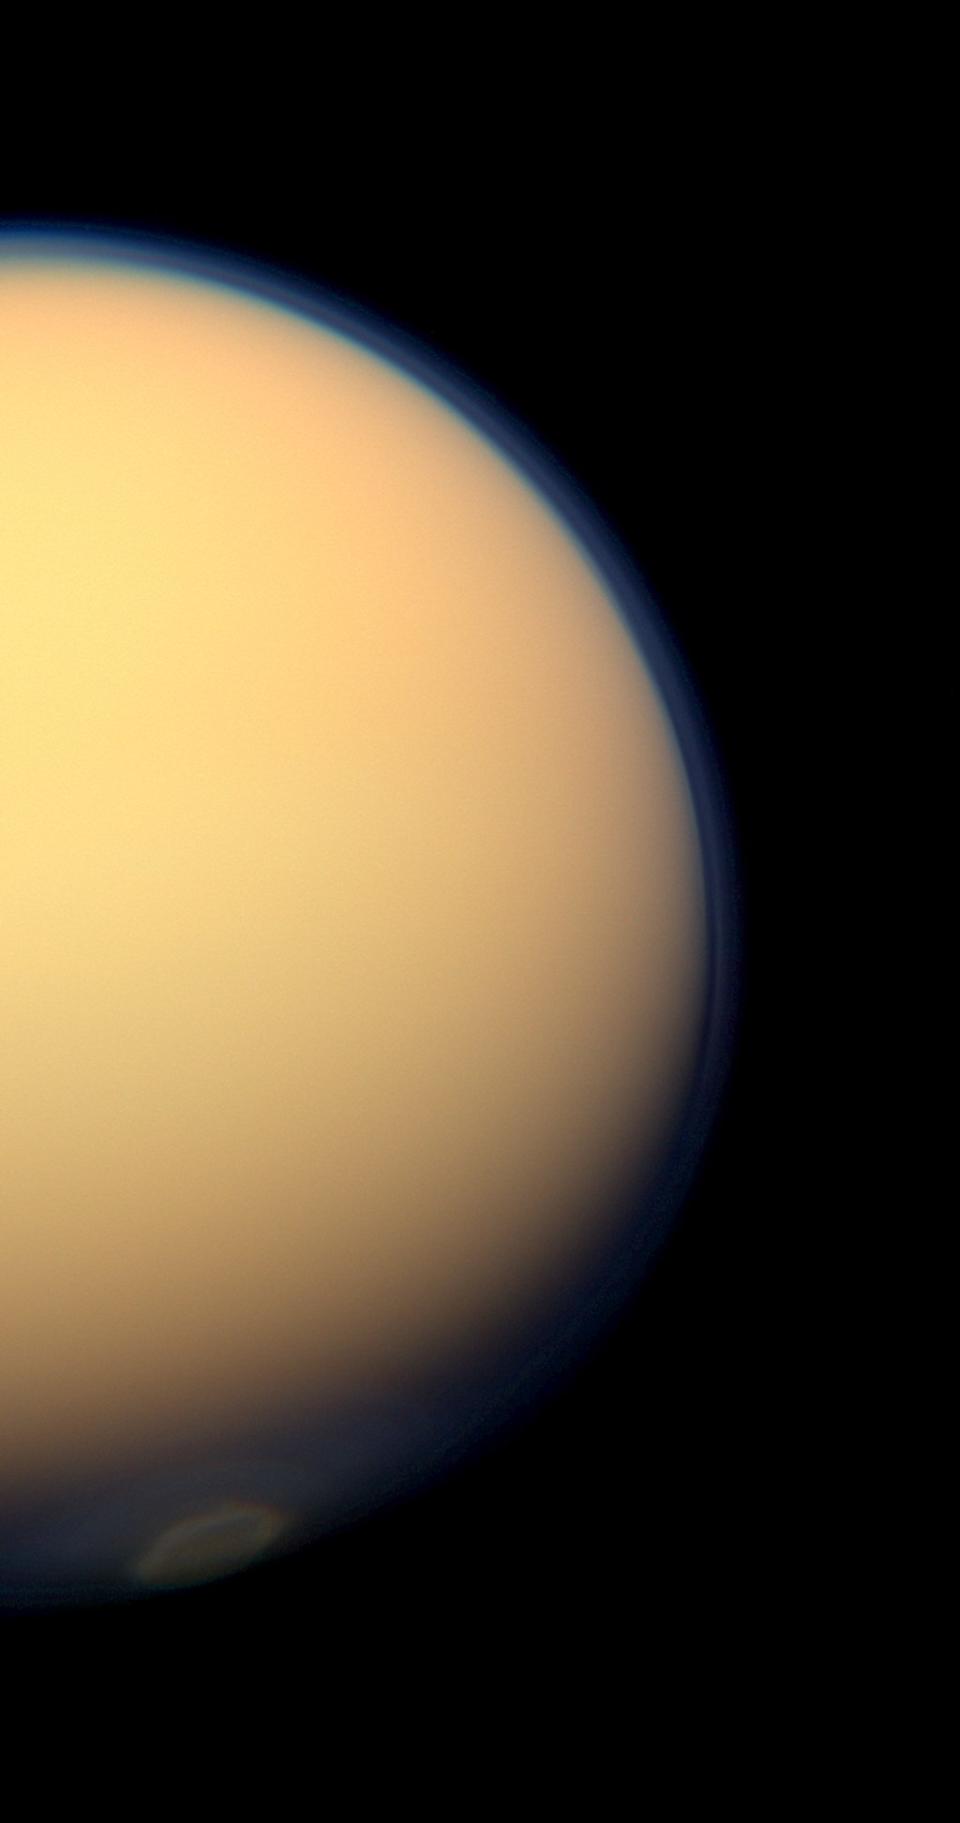 Titan's southern vortex, imaged by Cassini in July 2012. <cite>NASA/JPL-Caltech/Space Science Institute</cite>